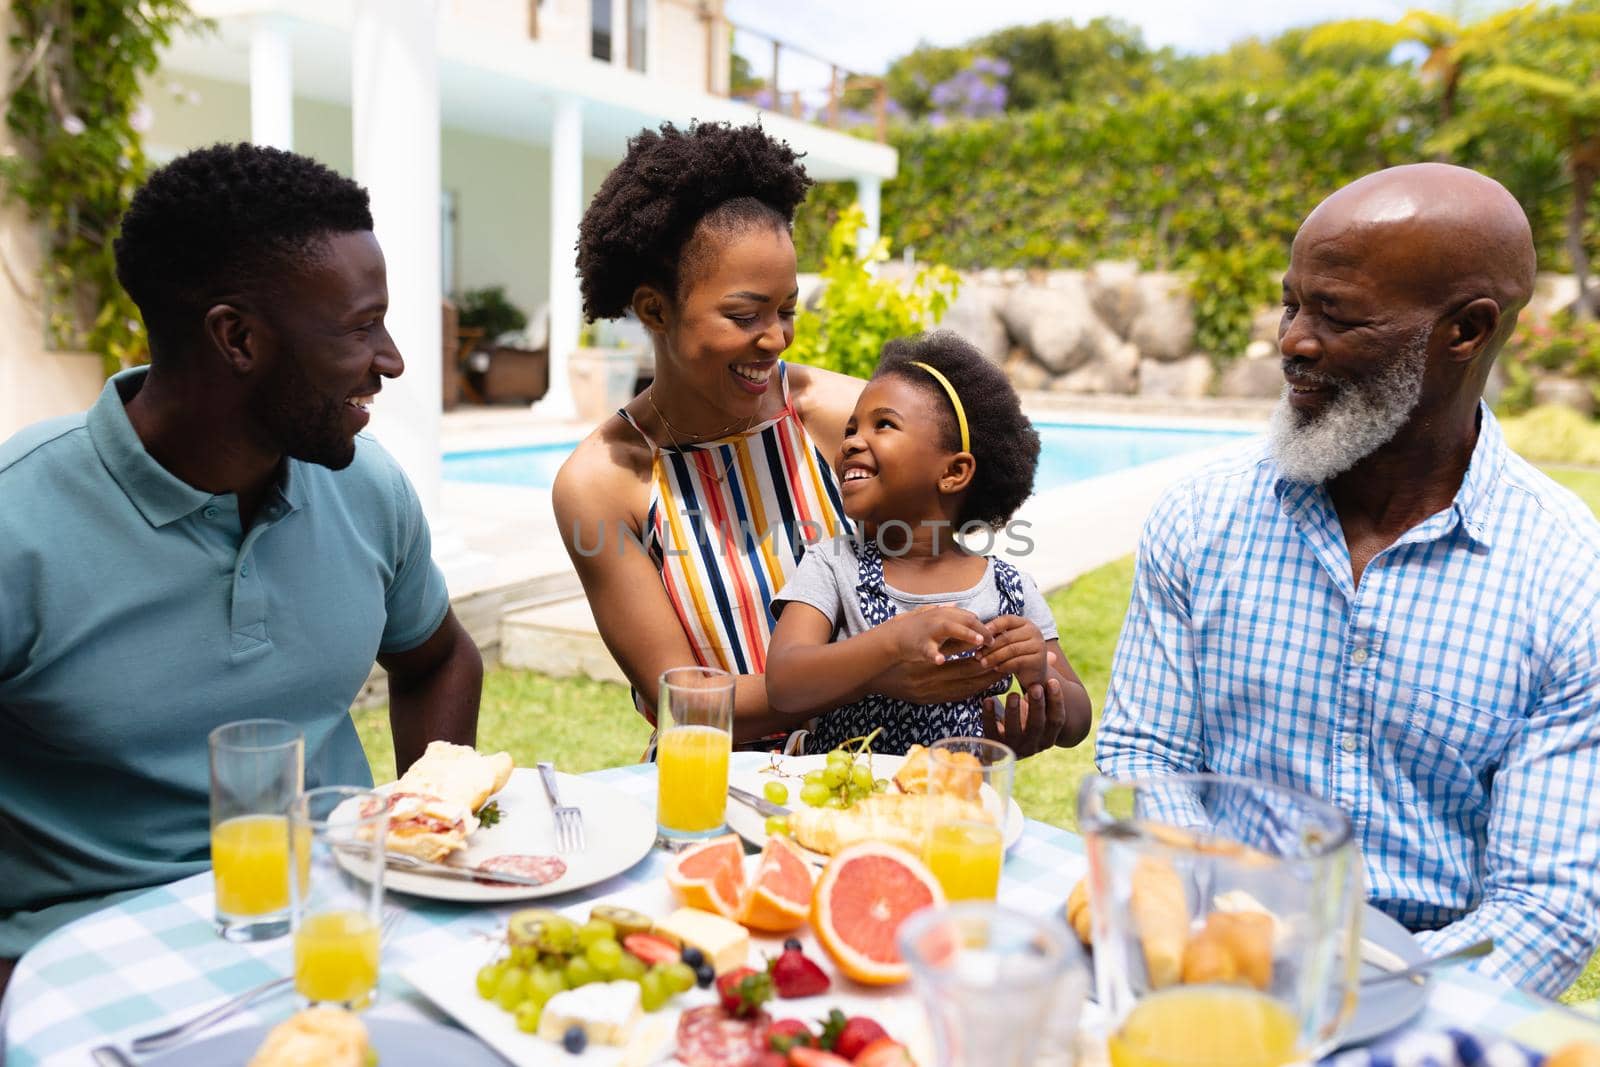 African american family spending leisure time together at backyard during brunch. family, love and togetherness concept, unaltered.